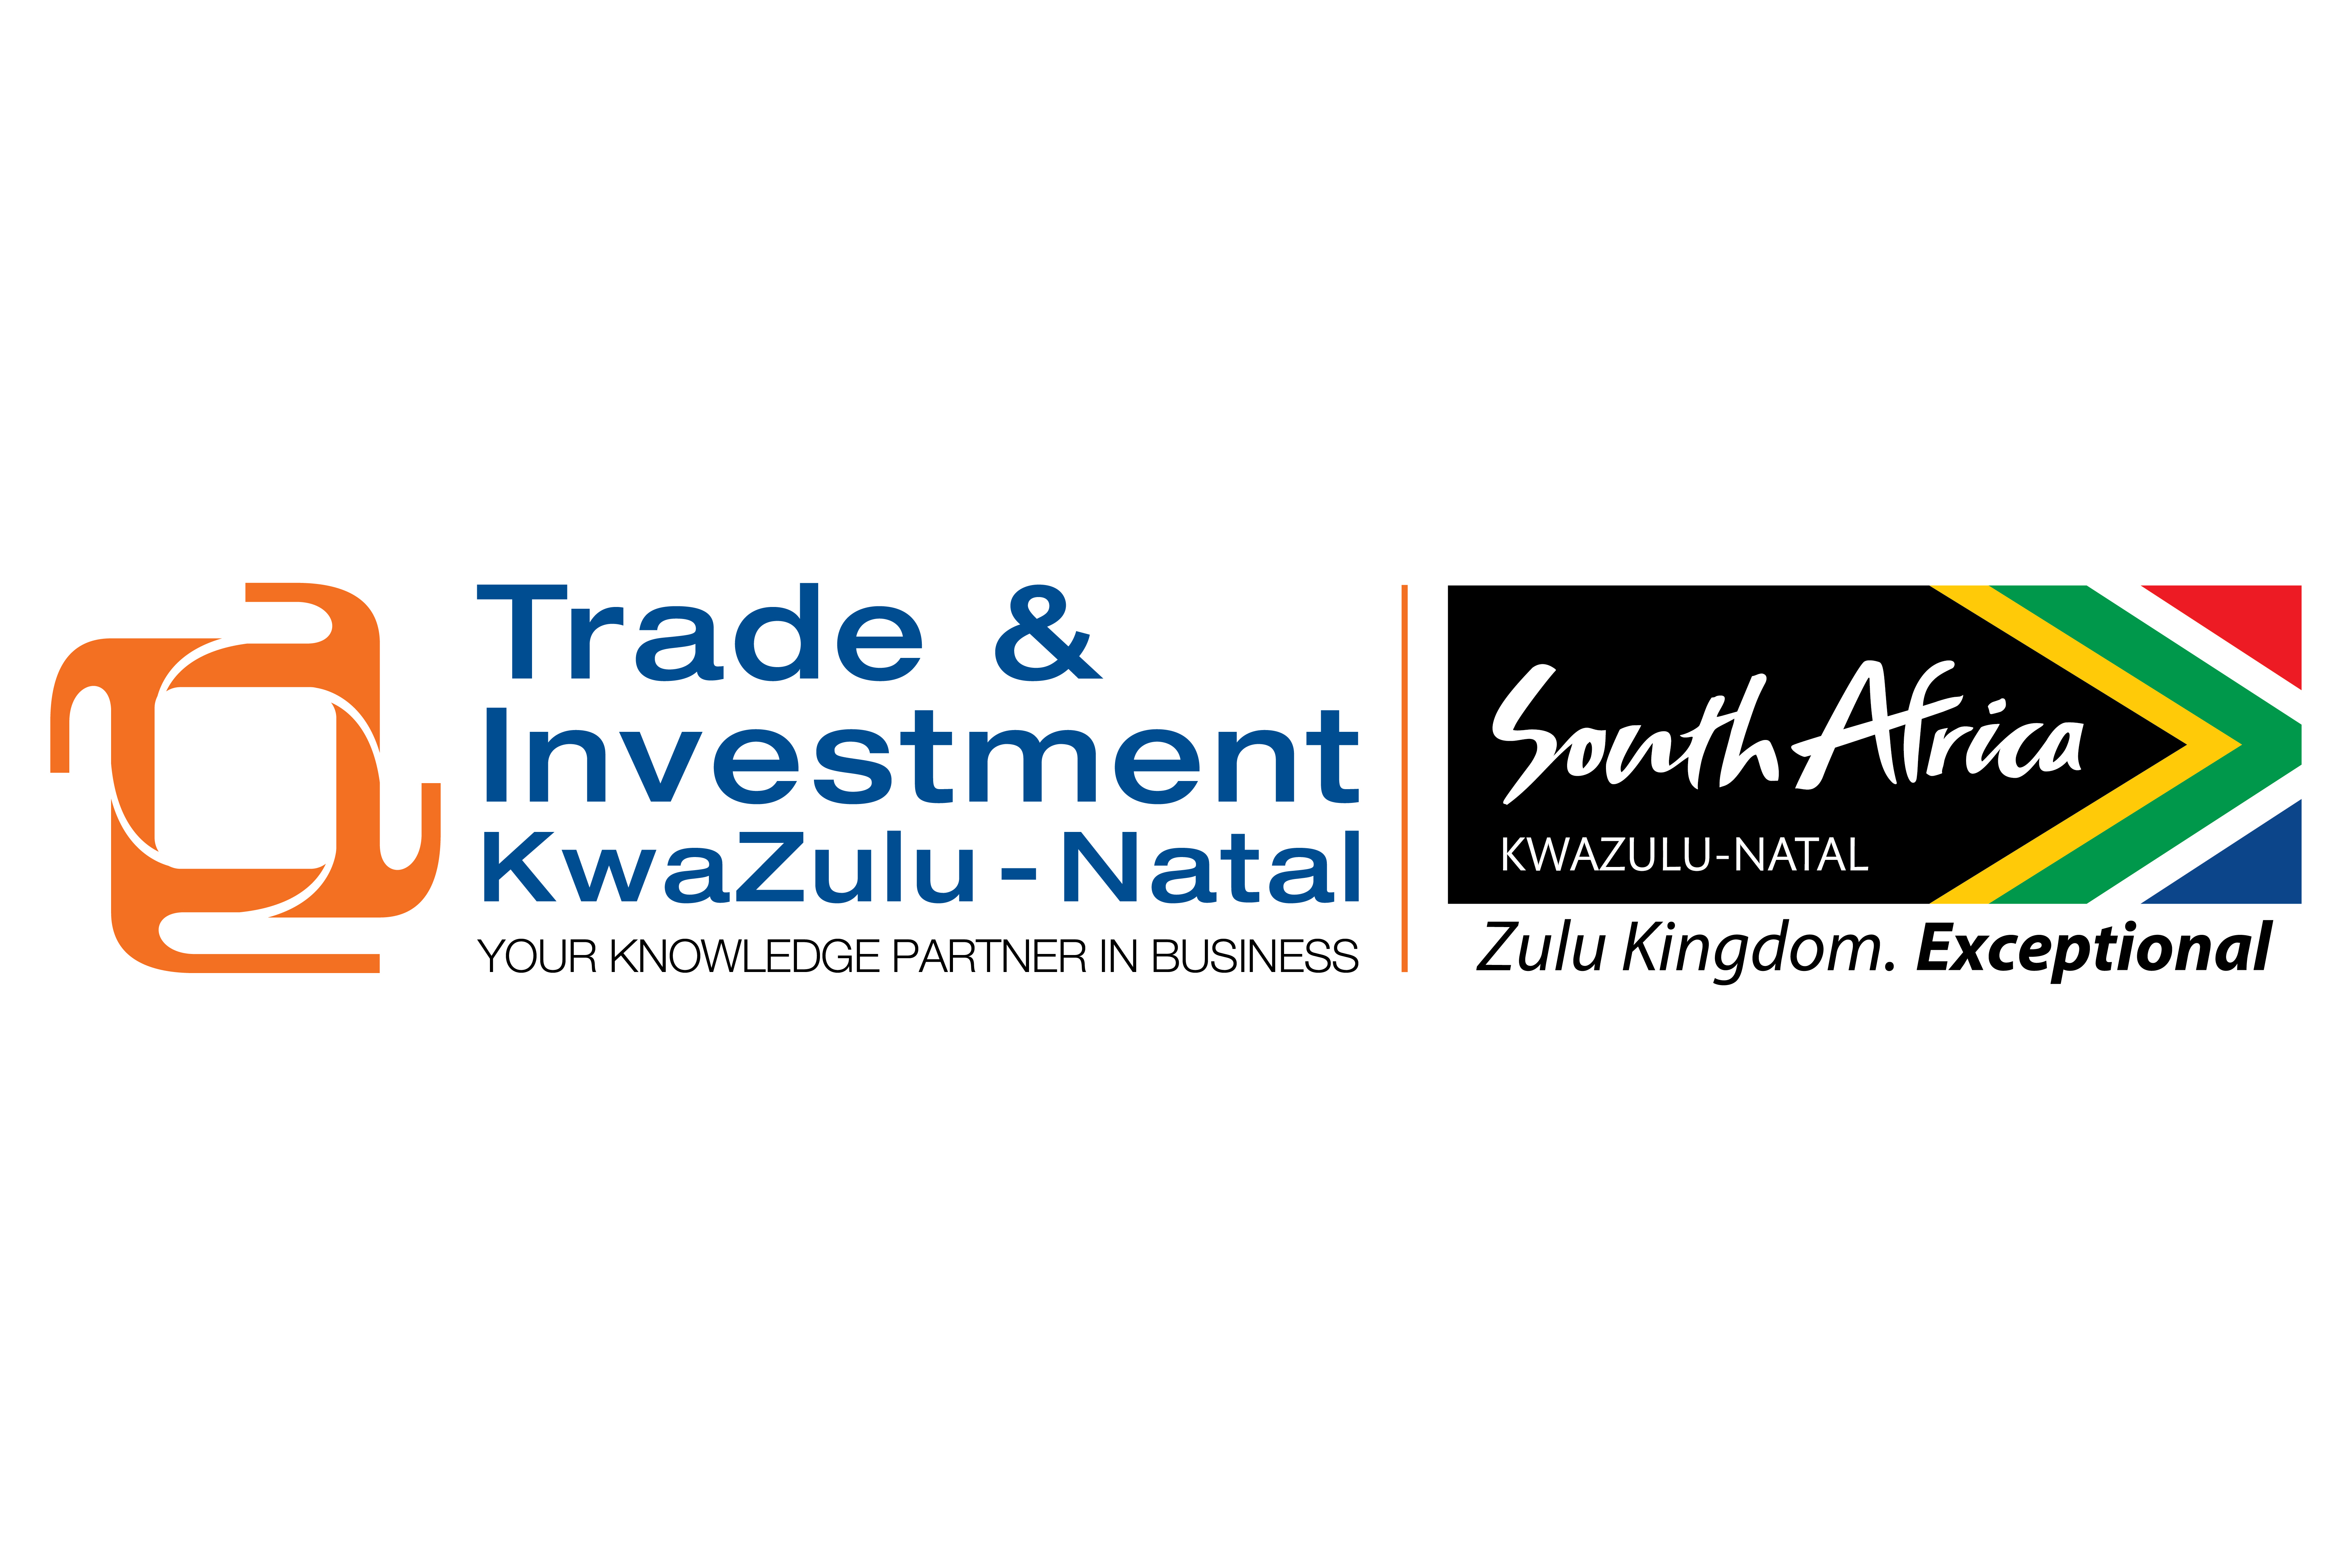 Trade and Investment KZN 4x6